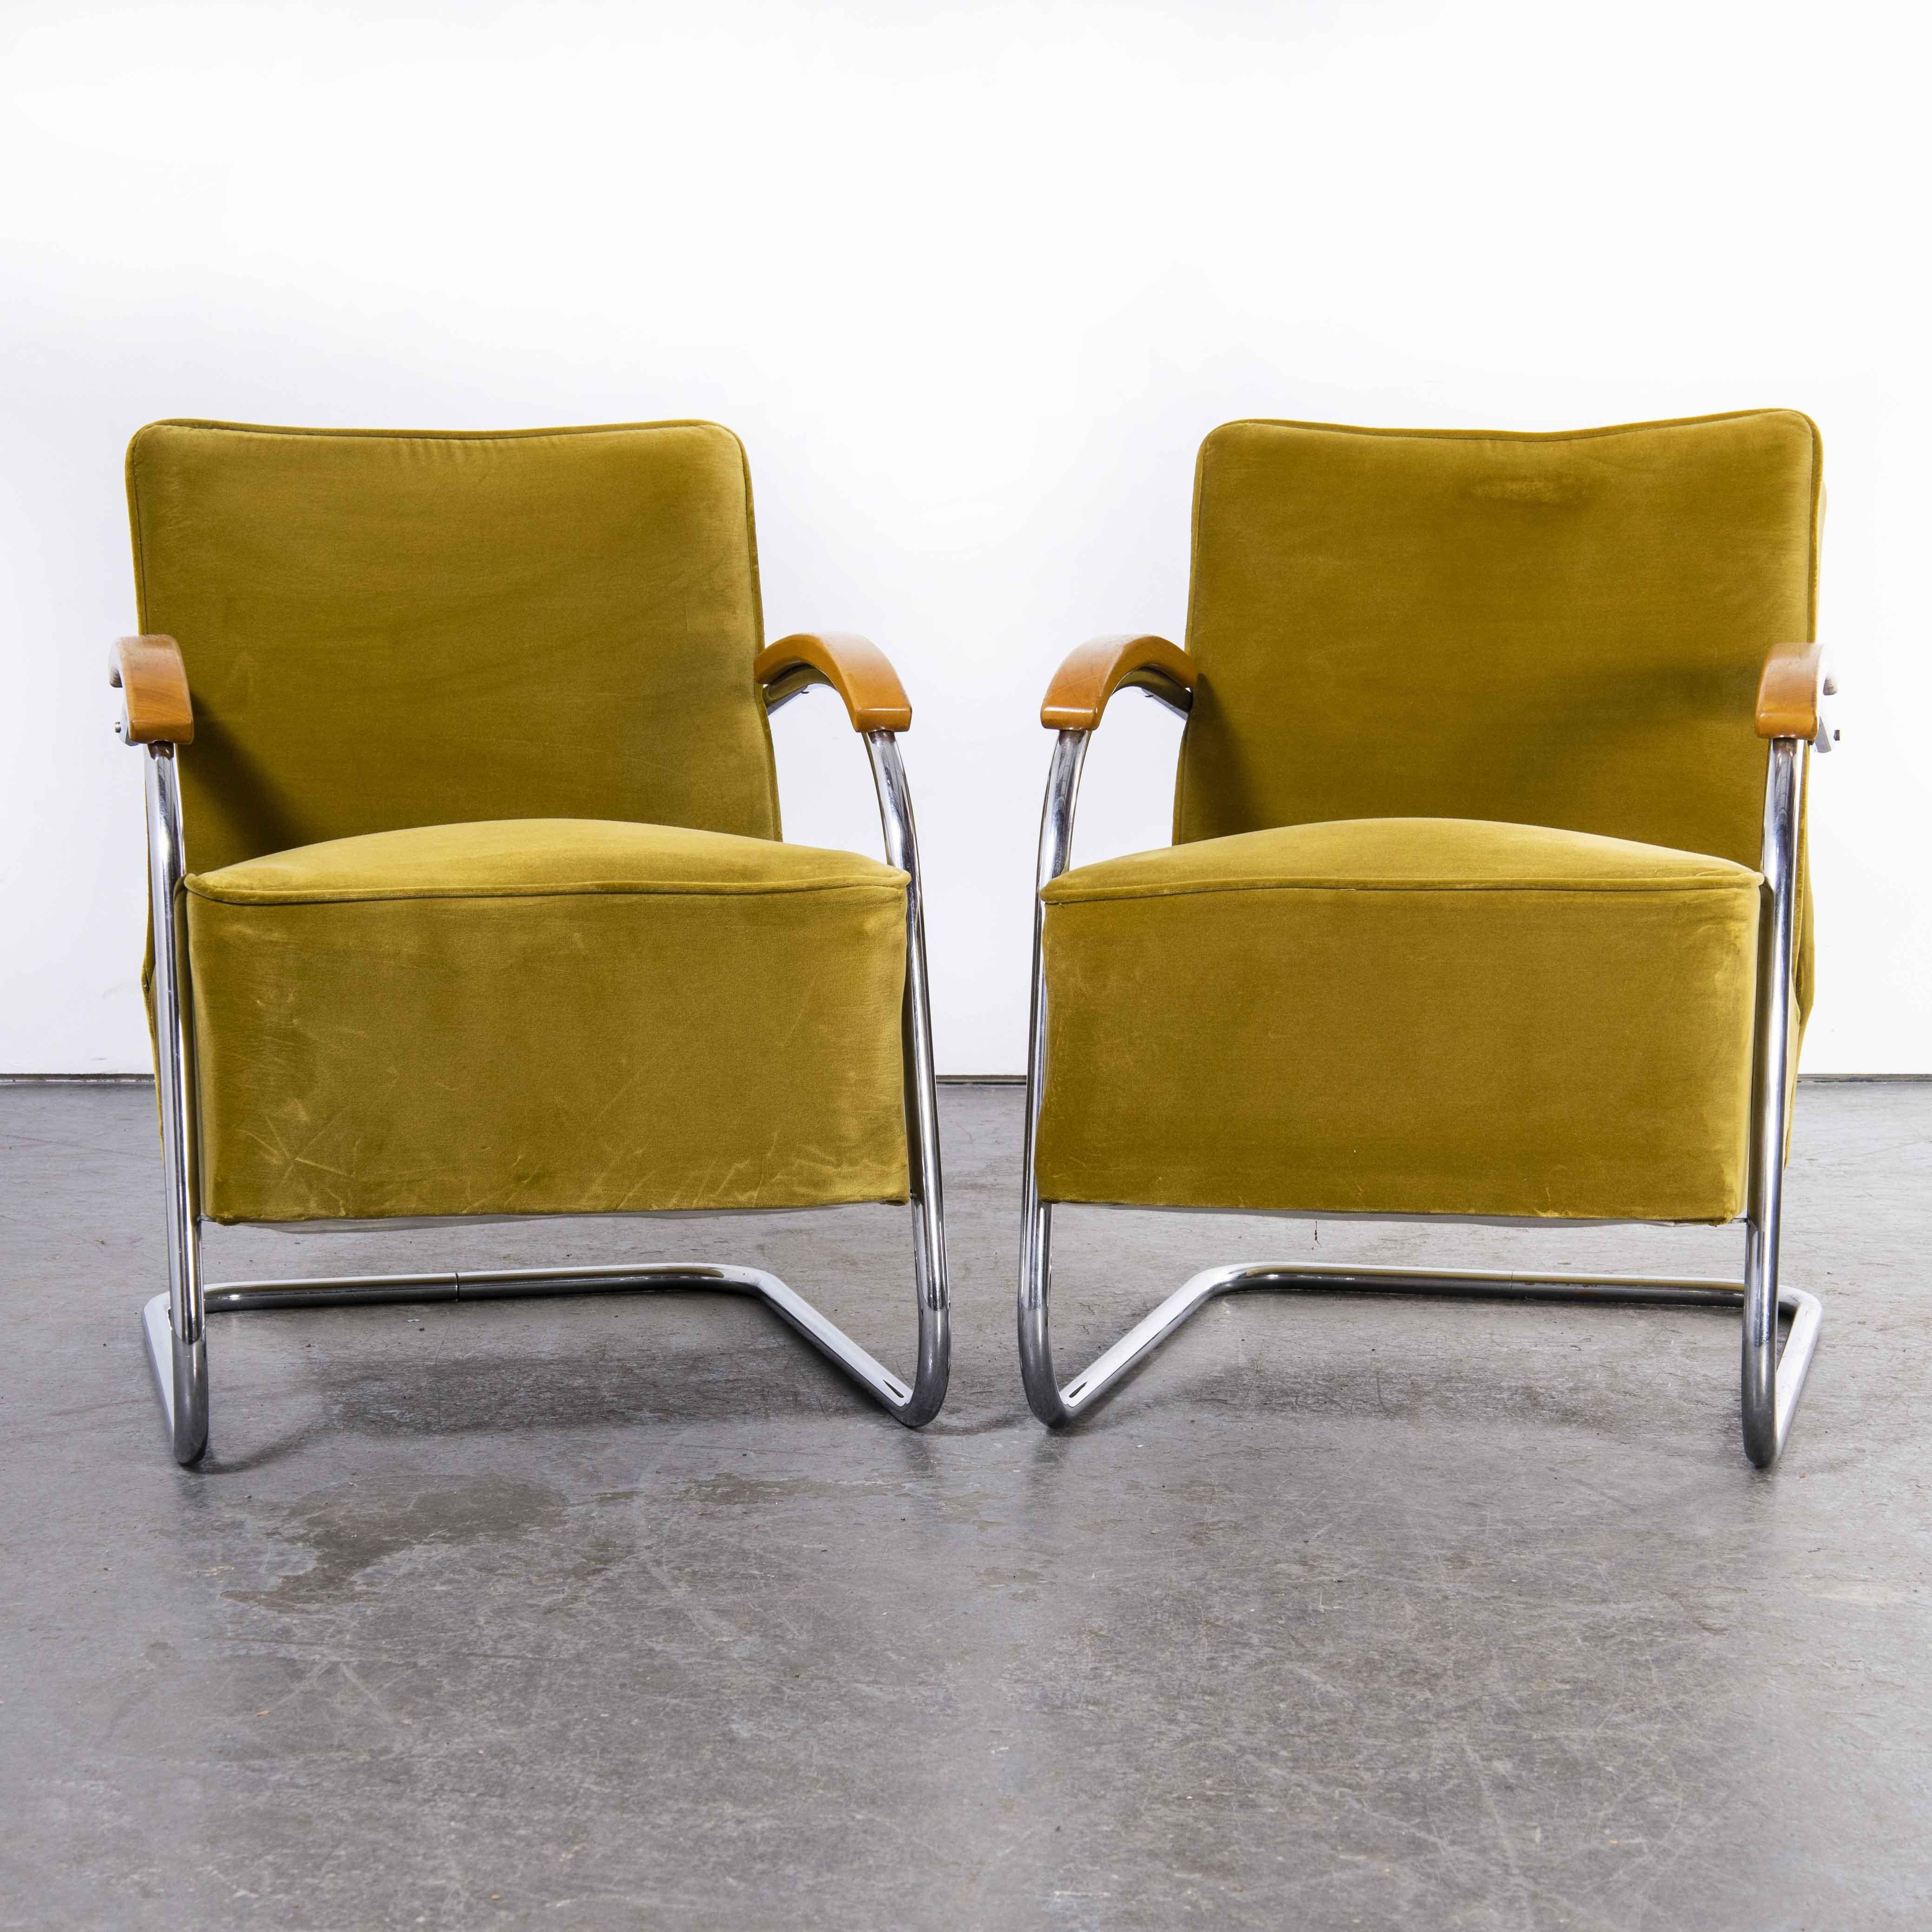 Fabric 1930's Pair of Mucke Melder Original Armchairs, FN 21, Fully Restored For Sale